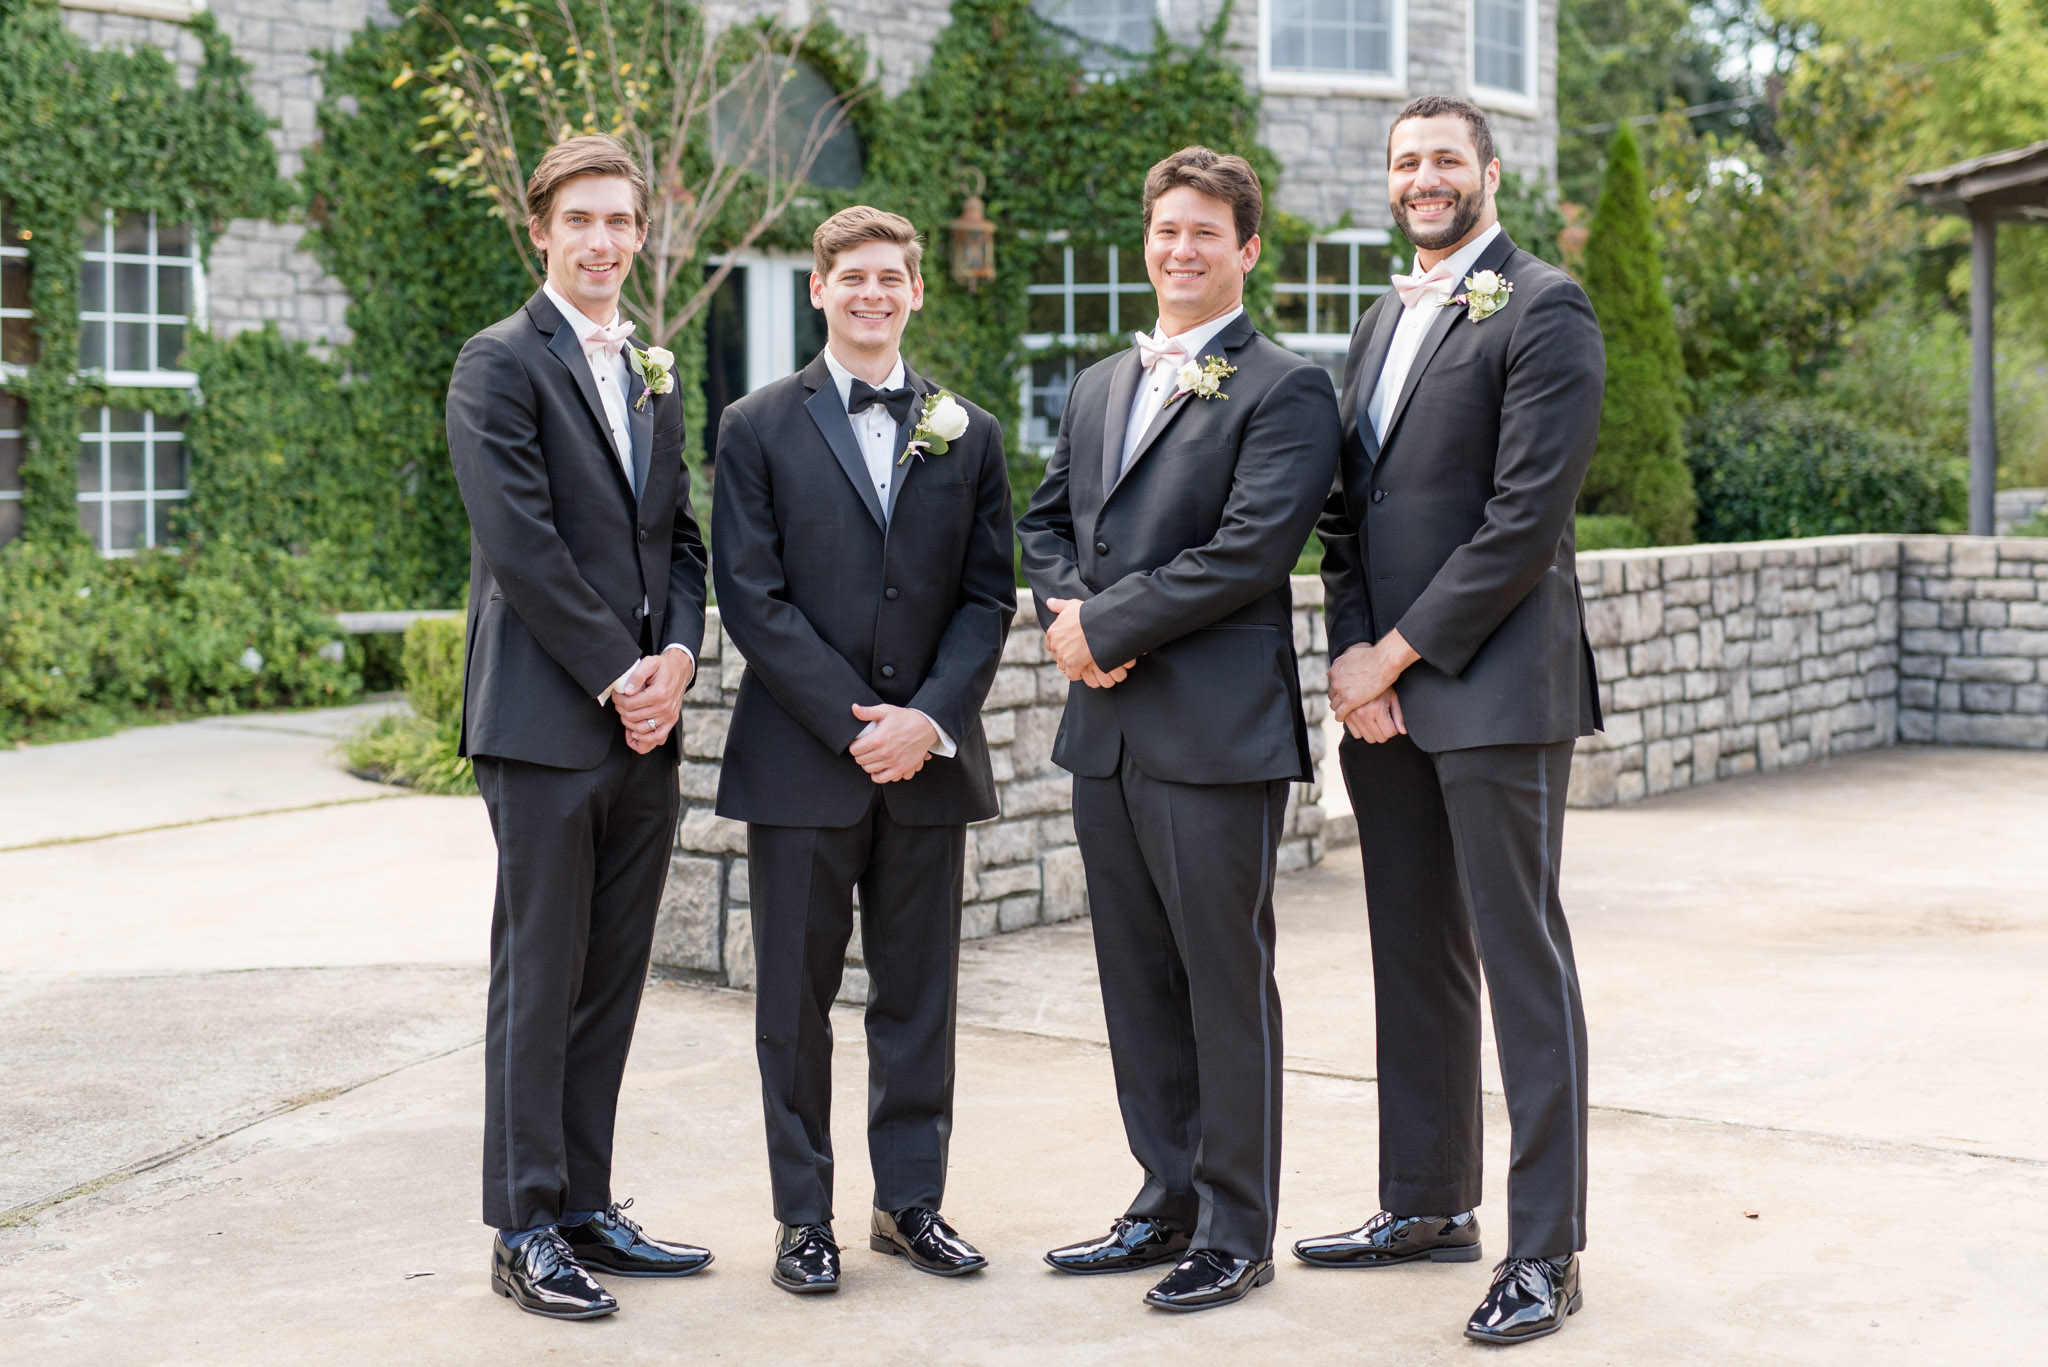 Groom and groomsmen smile at the camera.